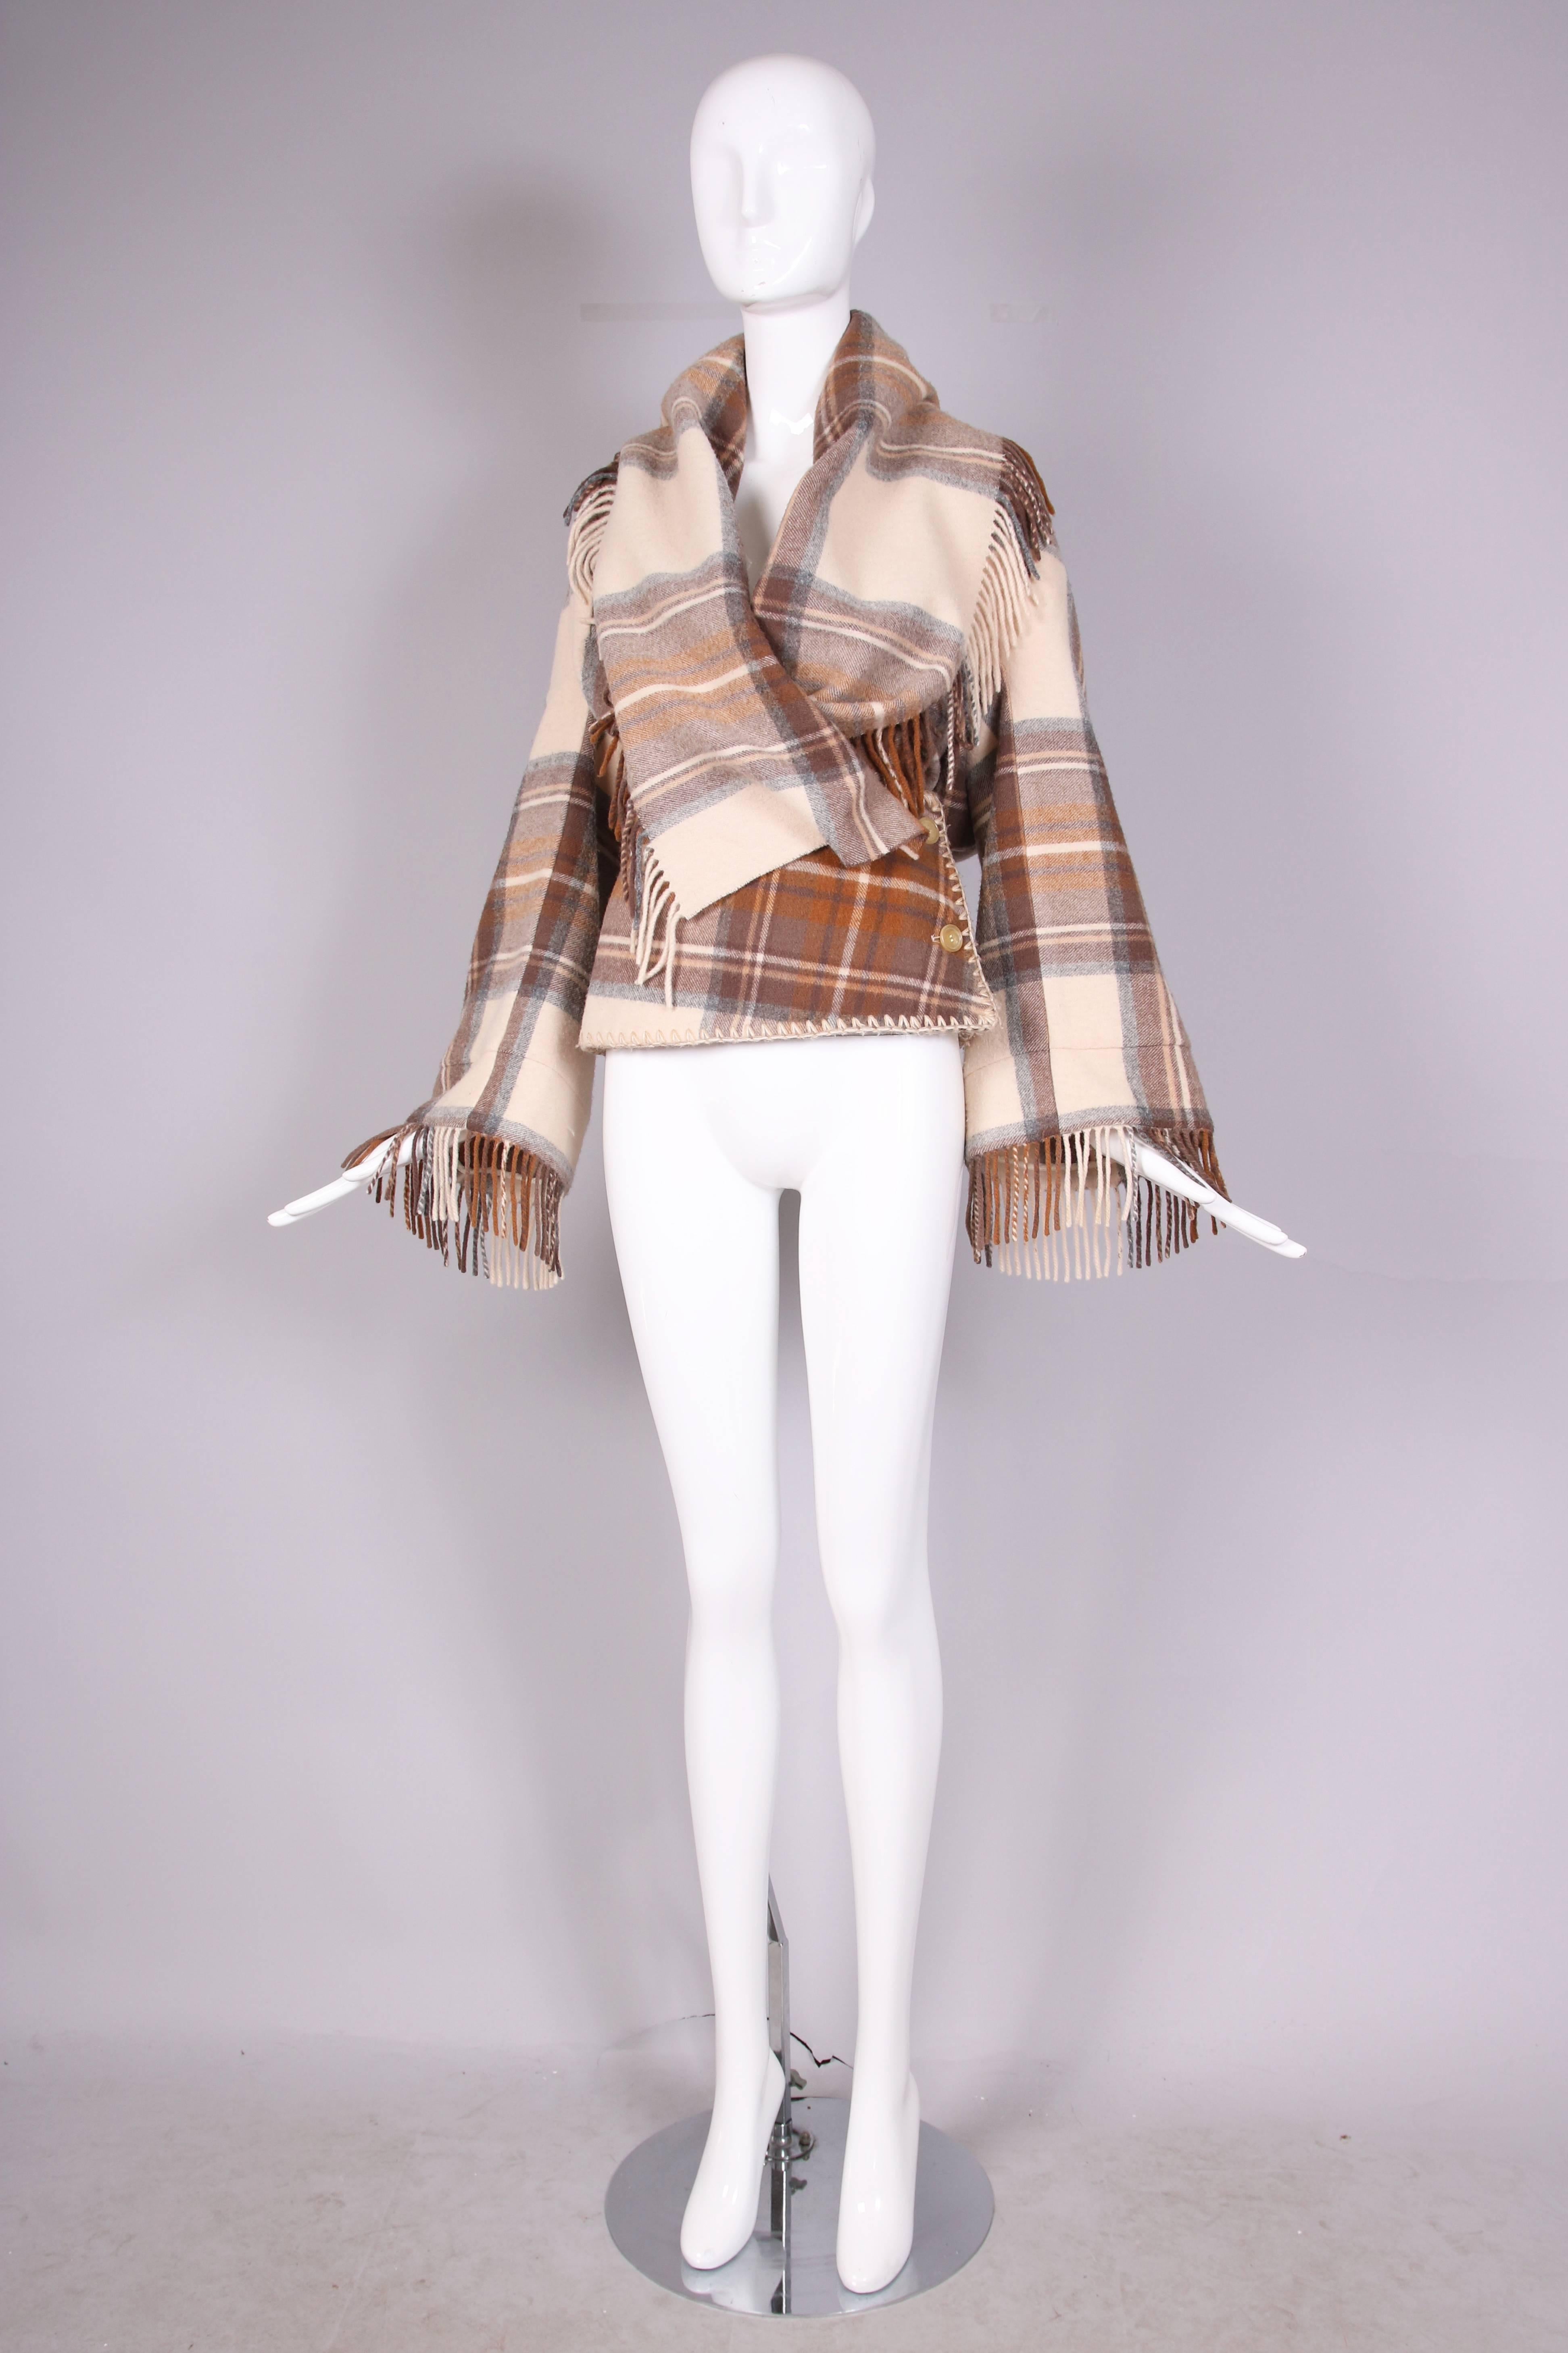 2005 Alexander McQueen fleece wool plaid shawl jacket in camel, cream and beige from the, 